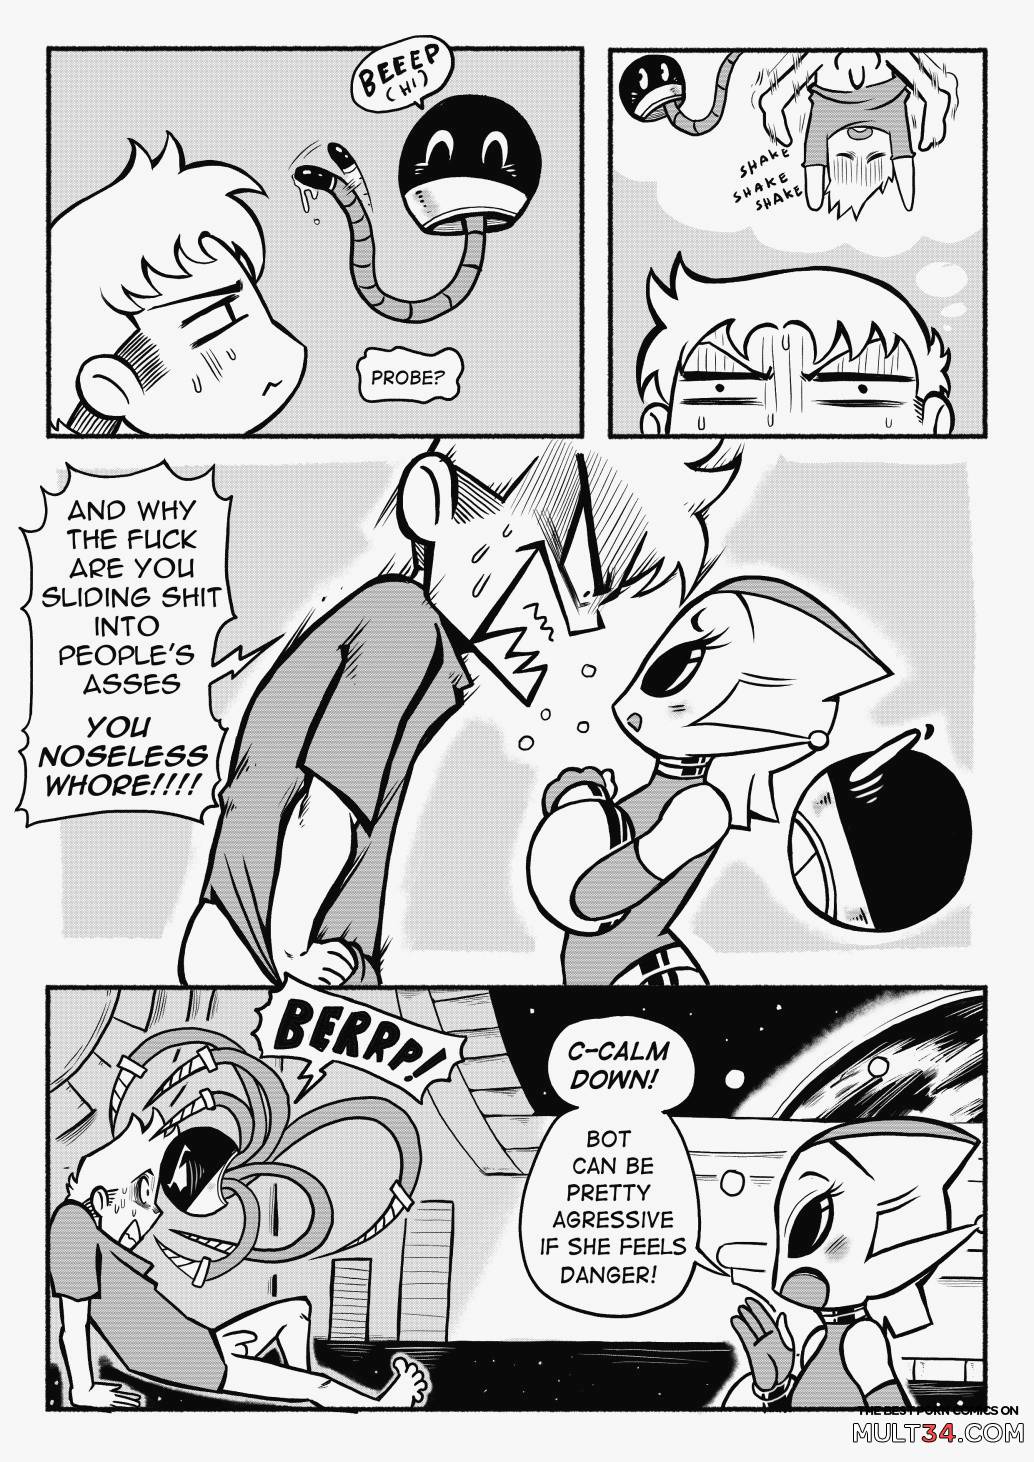 Abducted! - Mr.E page 8